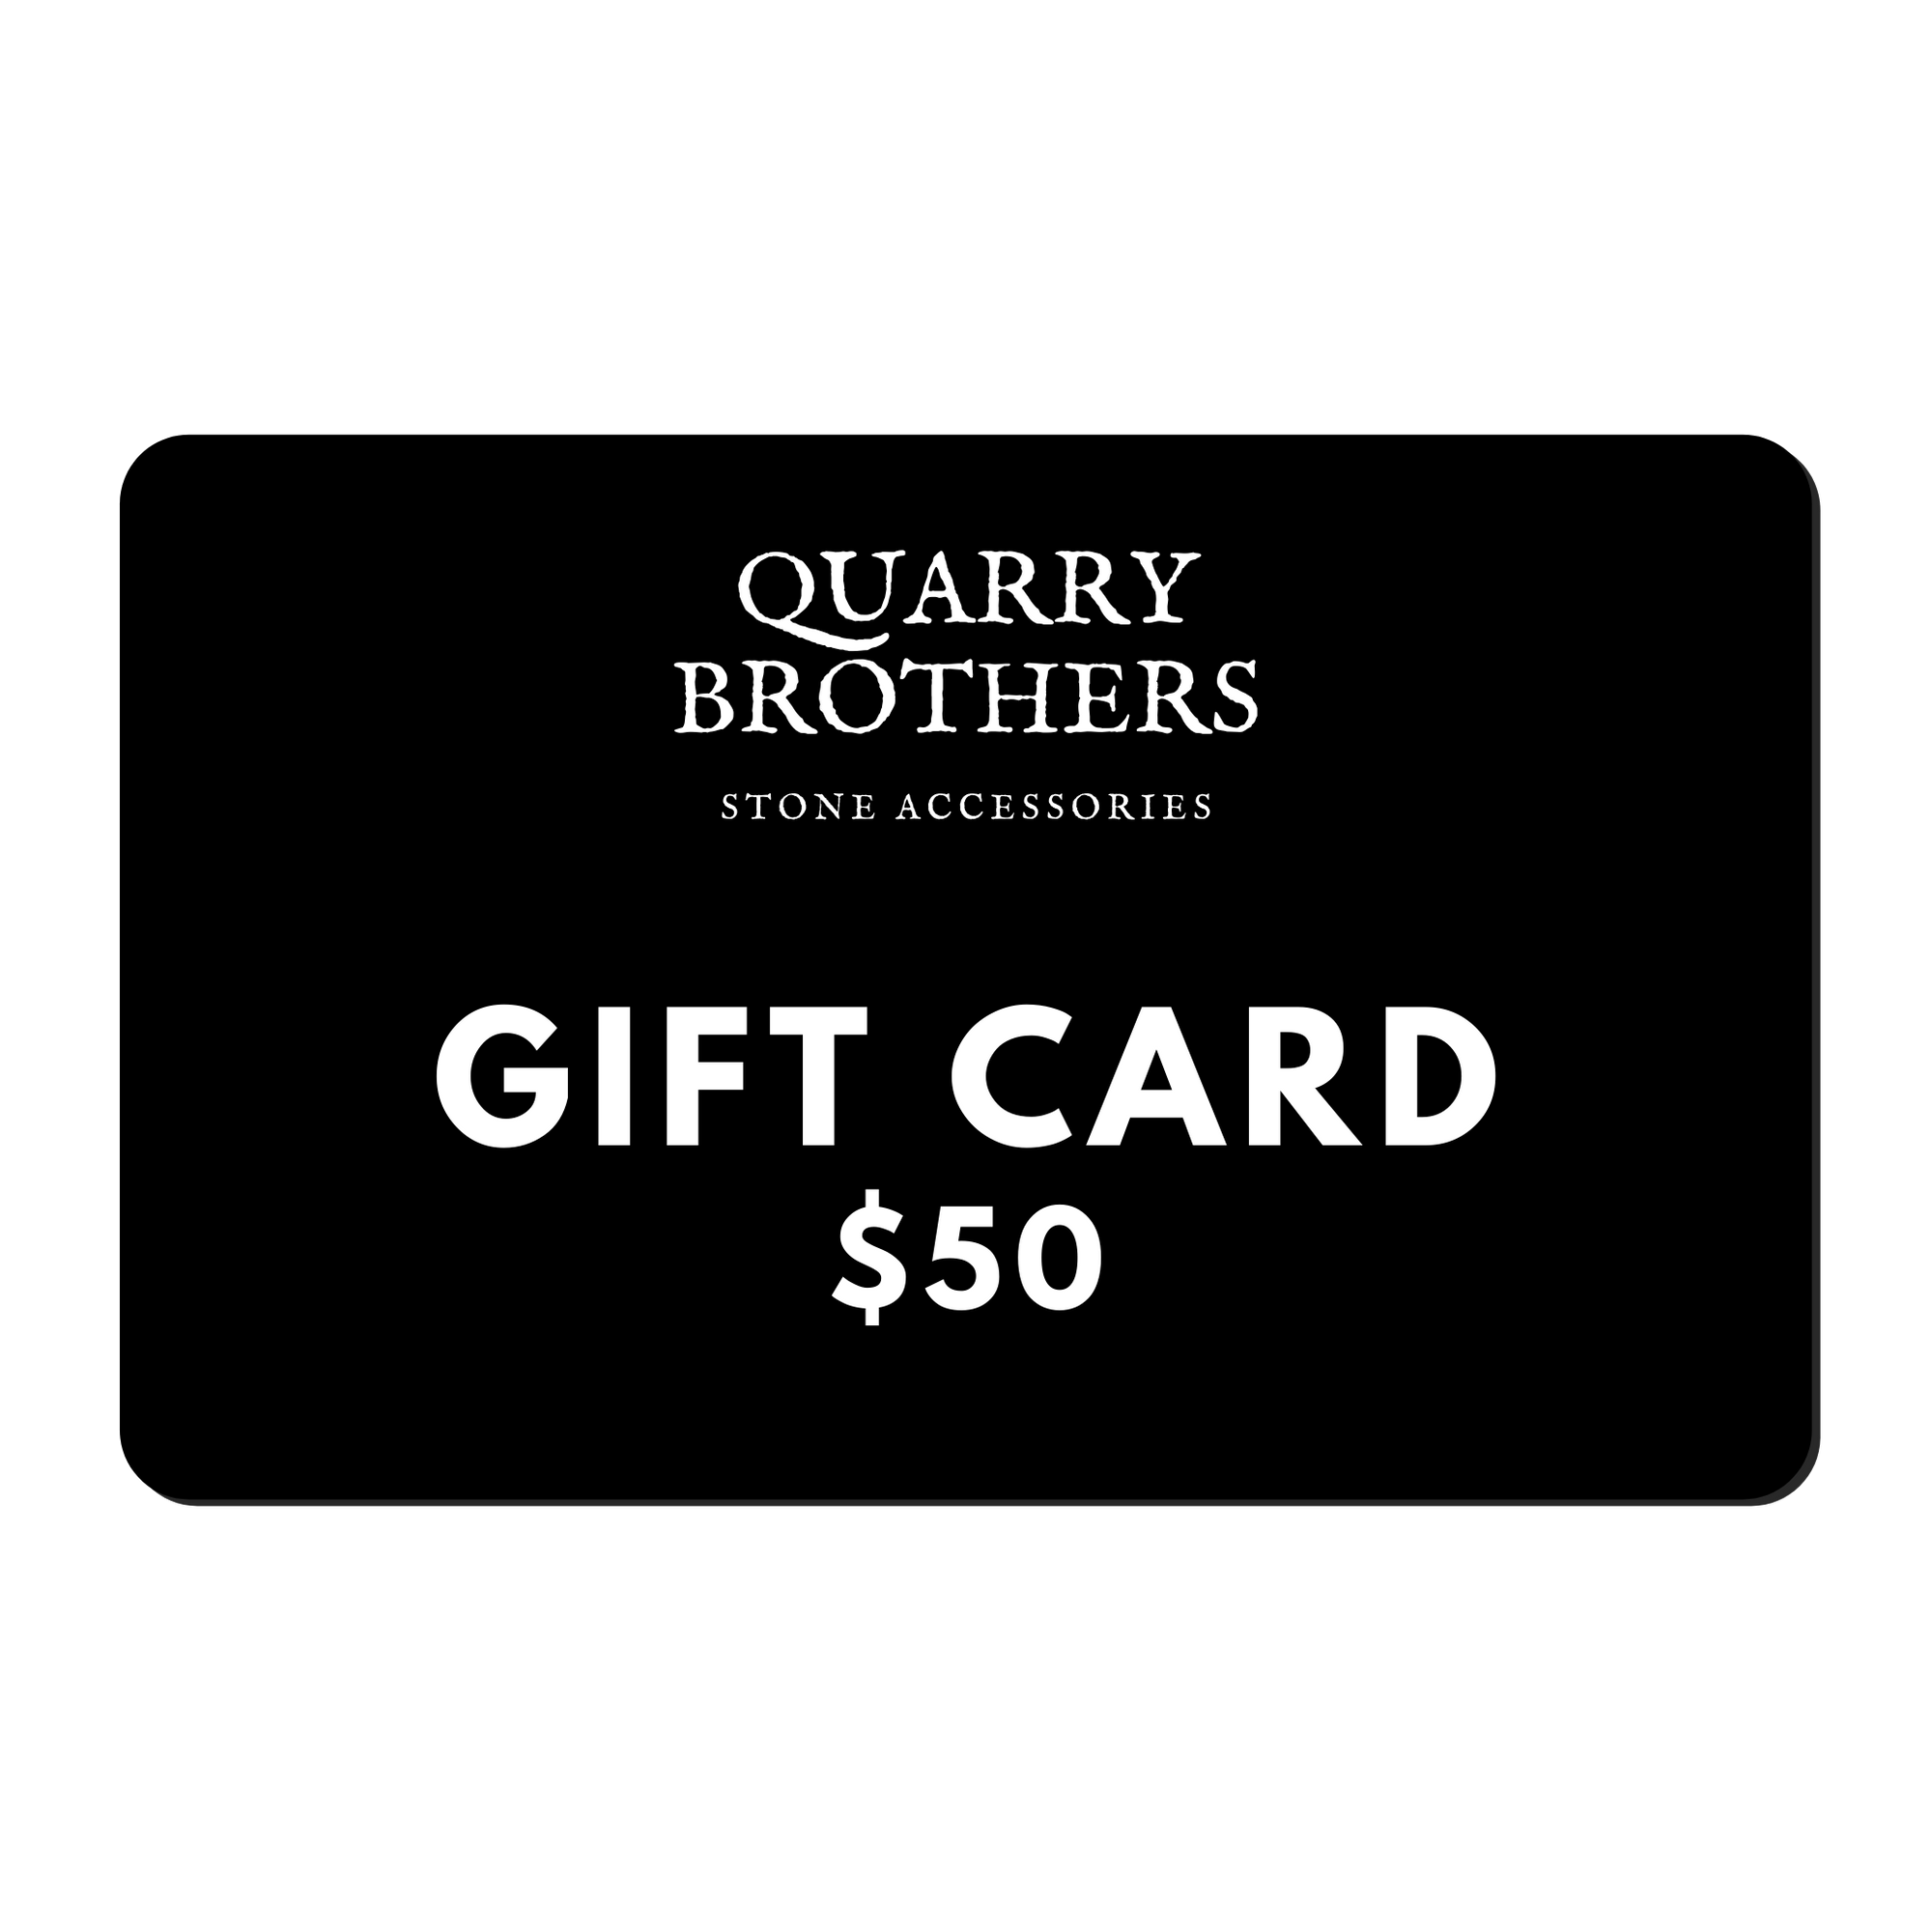 Quarry Brothers Gift Cards